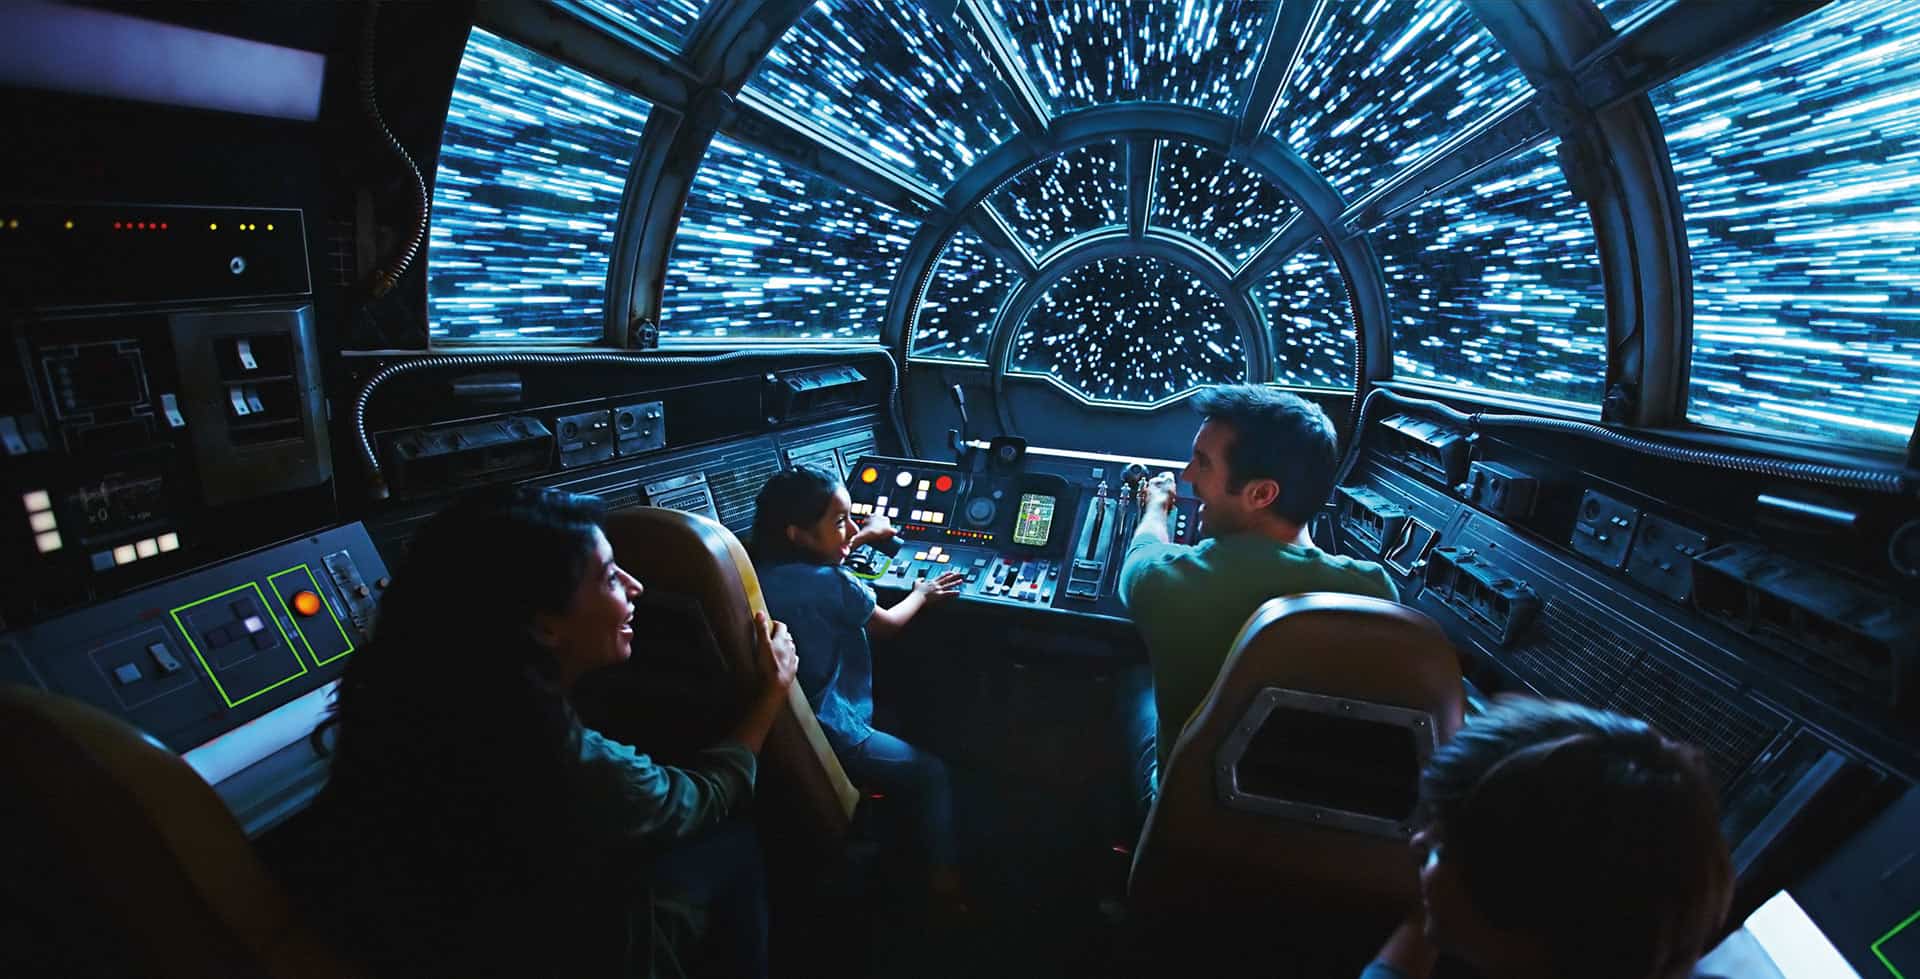 Everything you need to know before you go to Star Wars at Disney Word including the latest news on the new Star Wars Land - Star Wars: Galaxy's Edge | Hollywood Studios #starwars #disneyworld #hollywoodstudios #galaxysedge #disneyparks #starwarsgalaxysedge